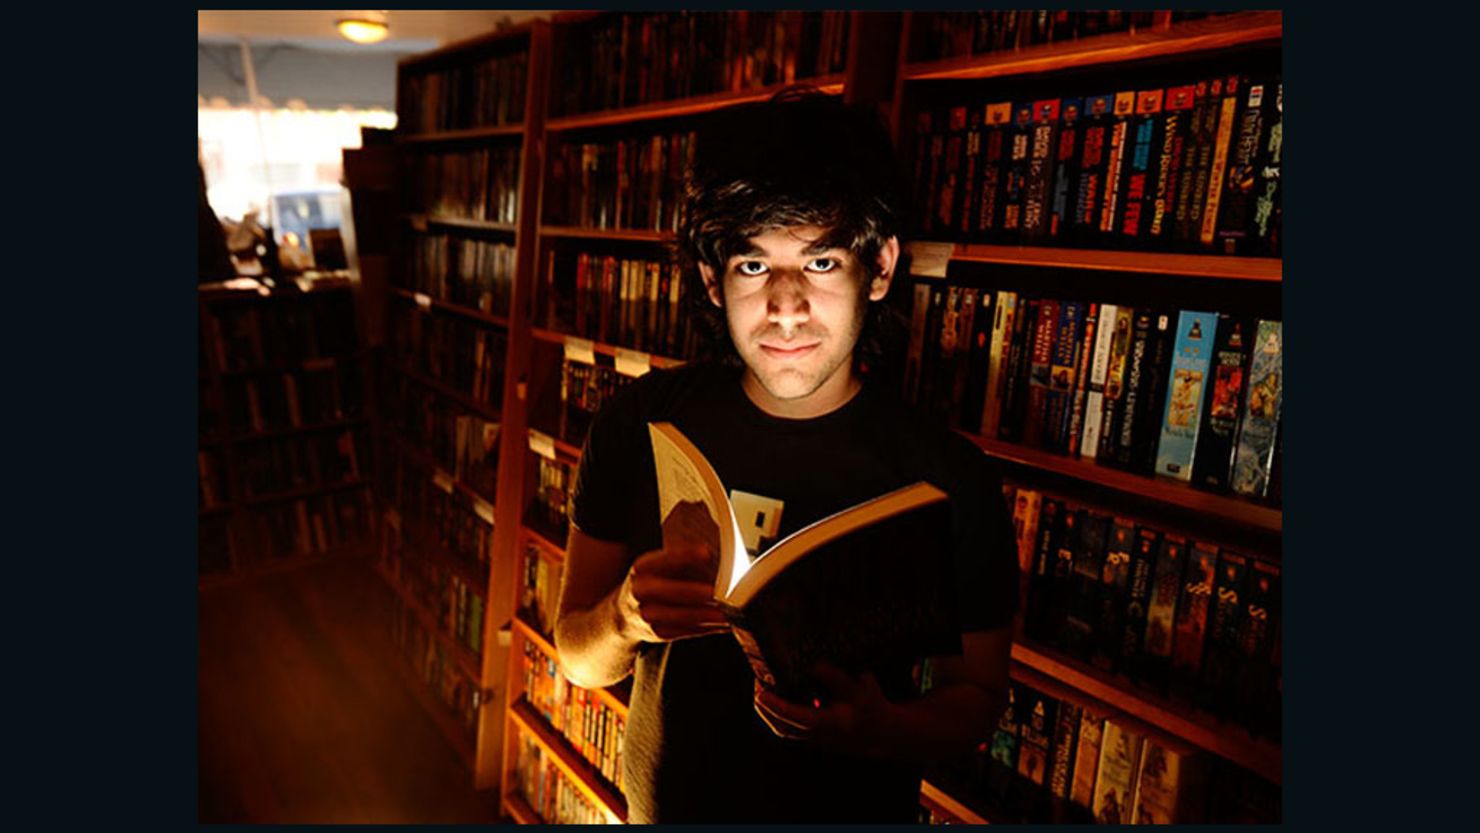 "The Internet's Own Boy" explores the brief life of hacker and Web activist Aaron Swartz, who died in early 2013.